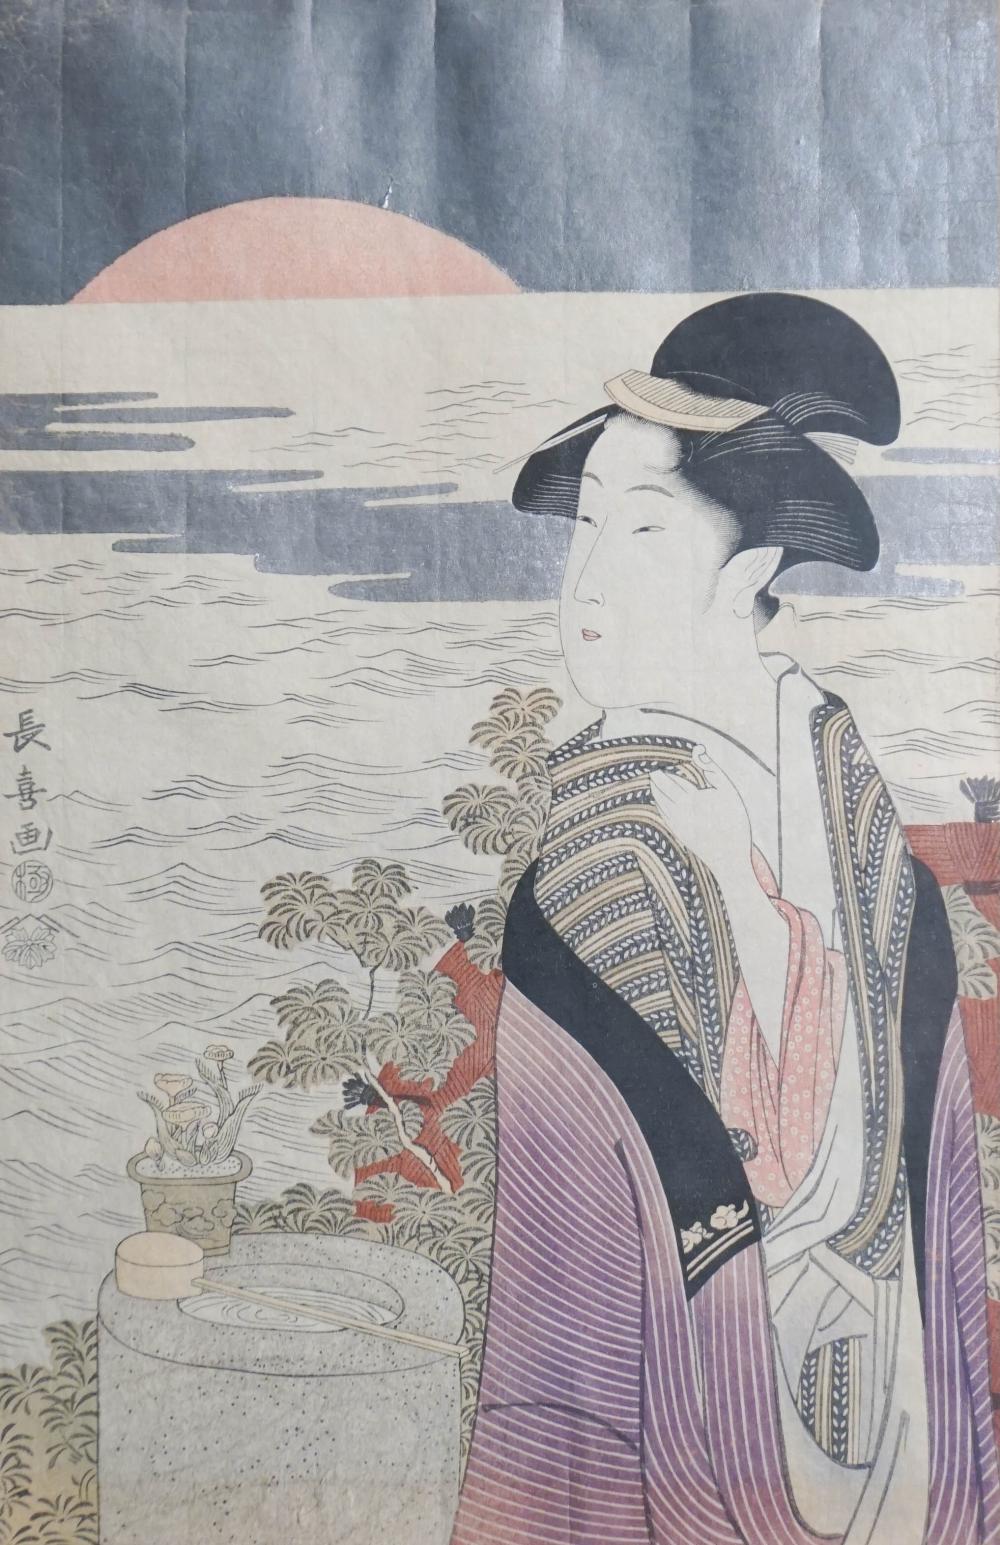 WOMEN BY THE SEA, JAPANESE BLOCK